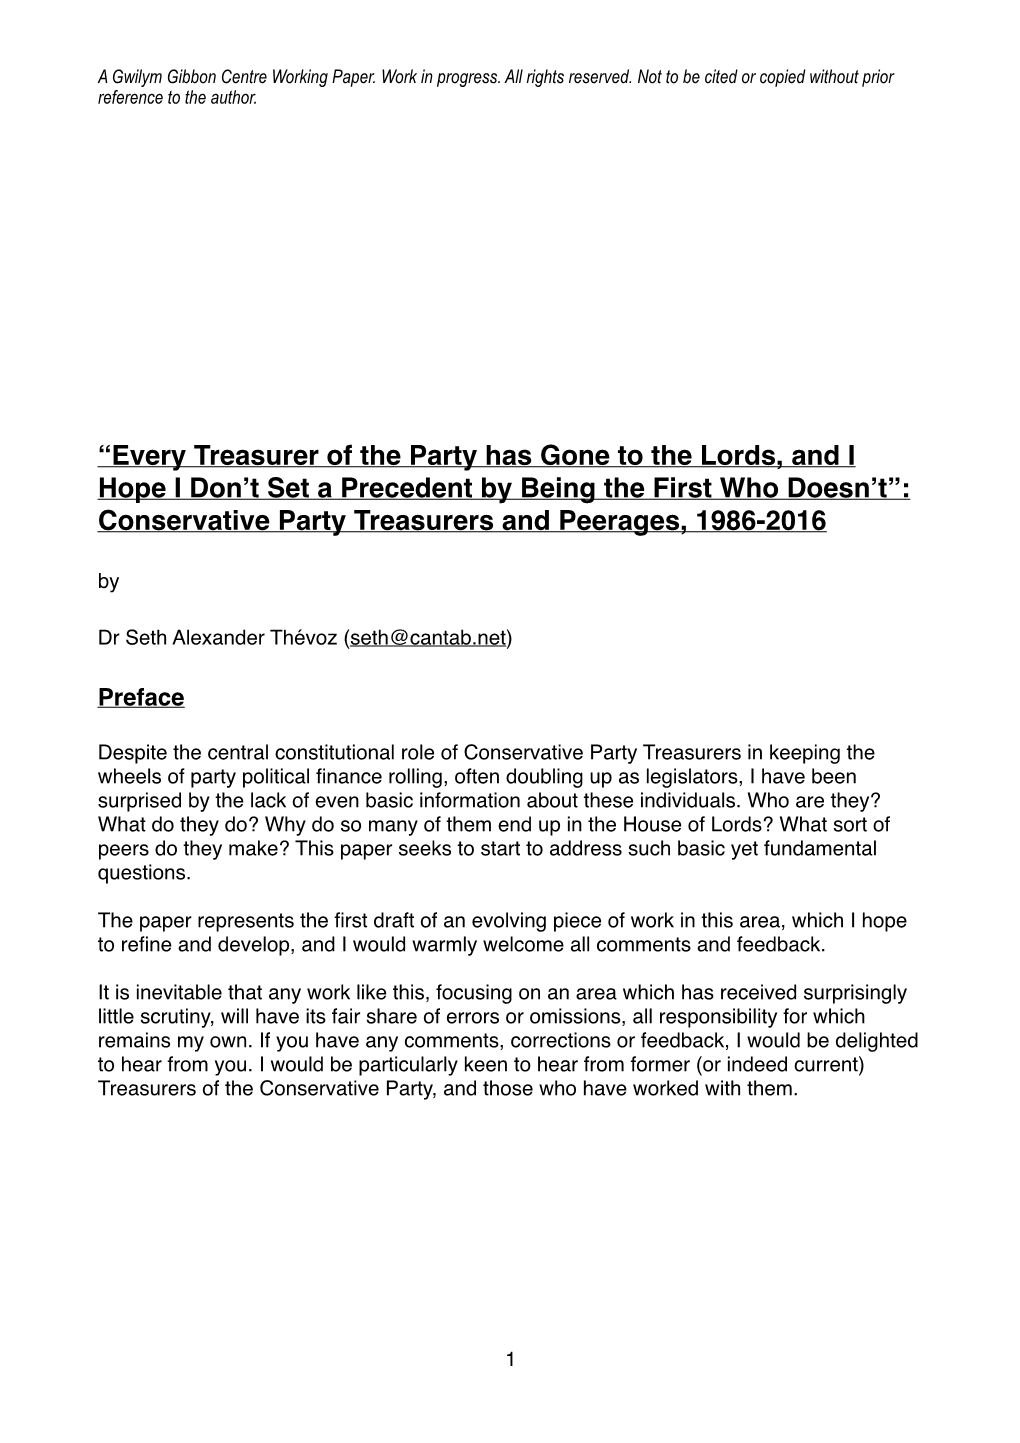 Conservative Treasurers Have Been in the Lords